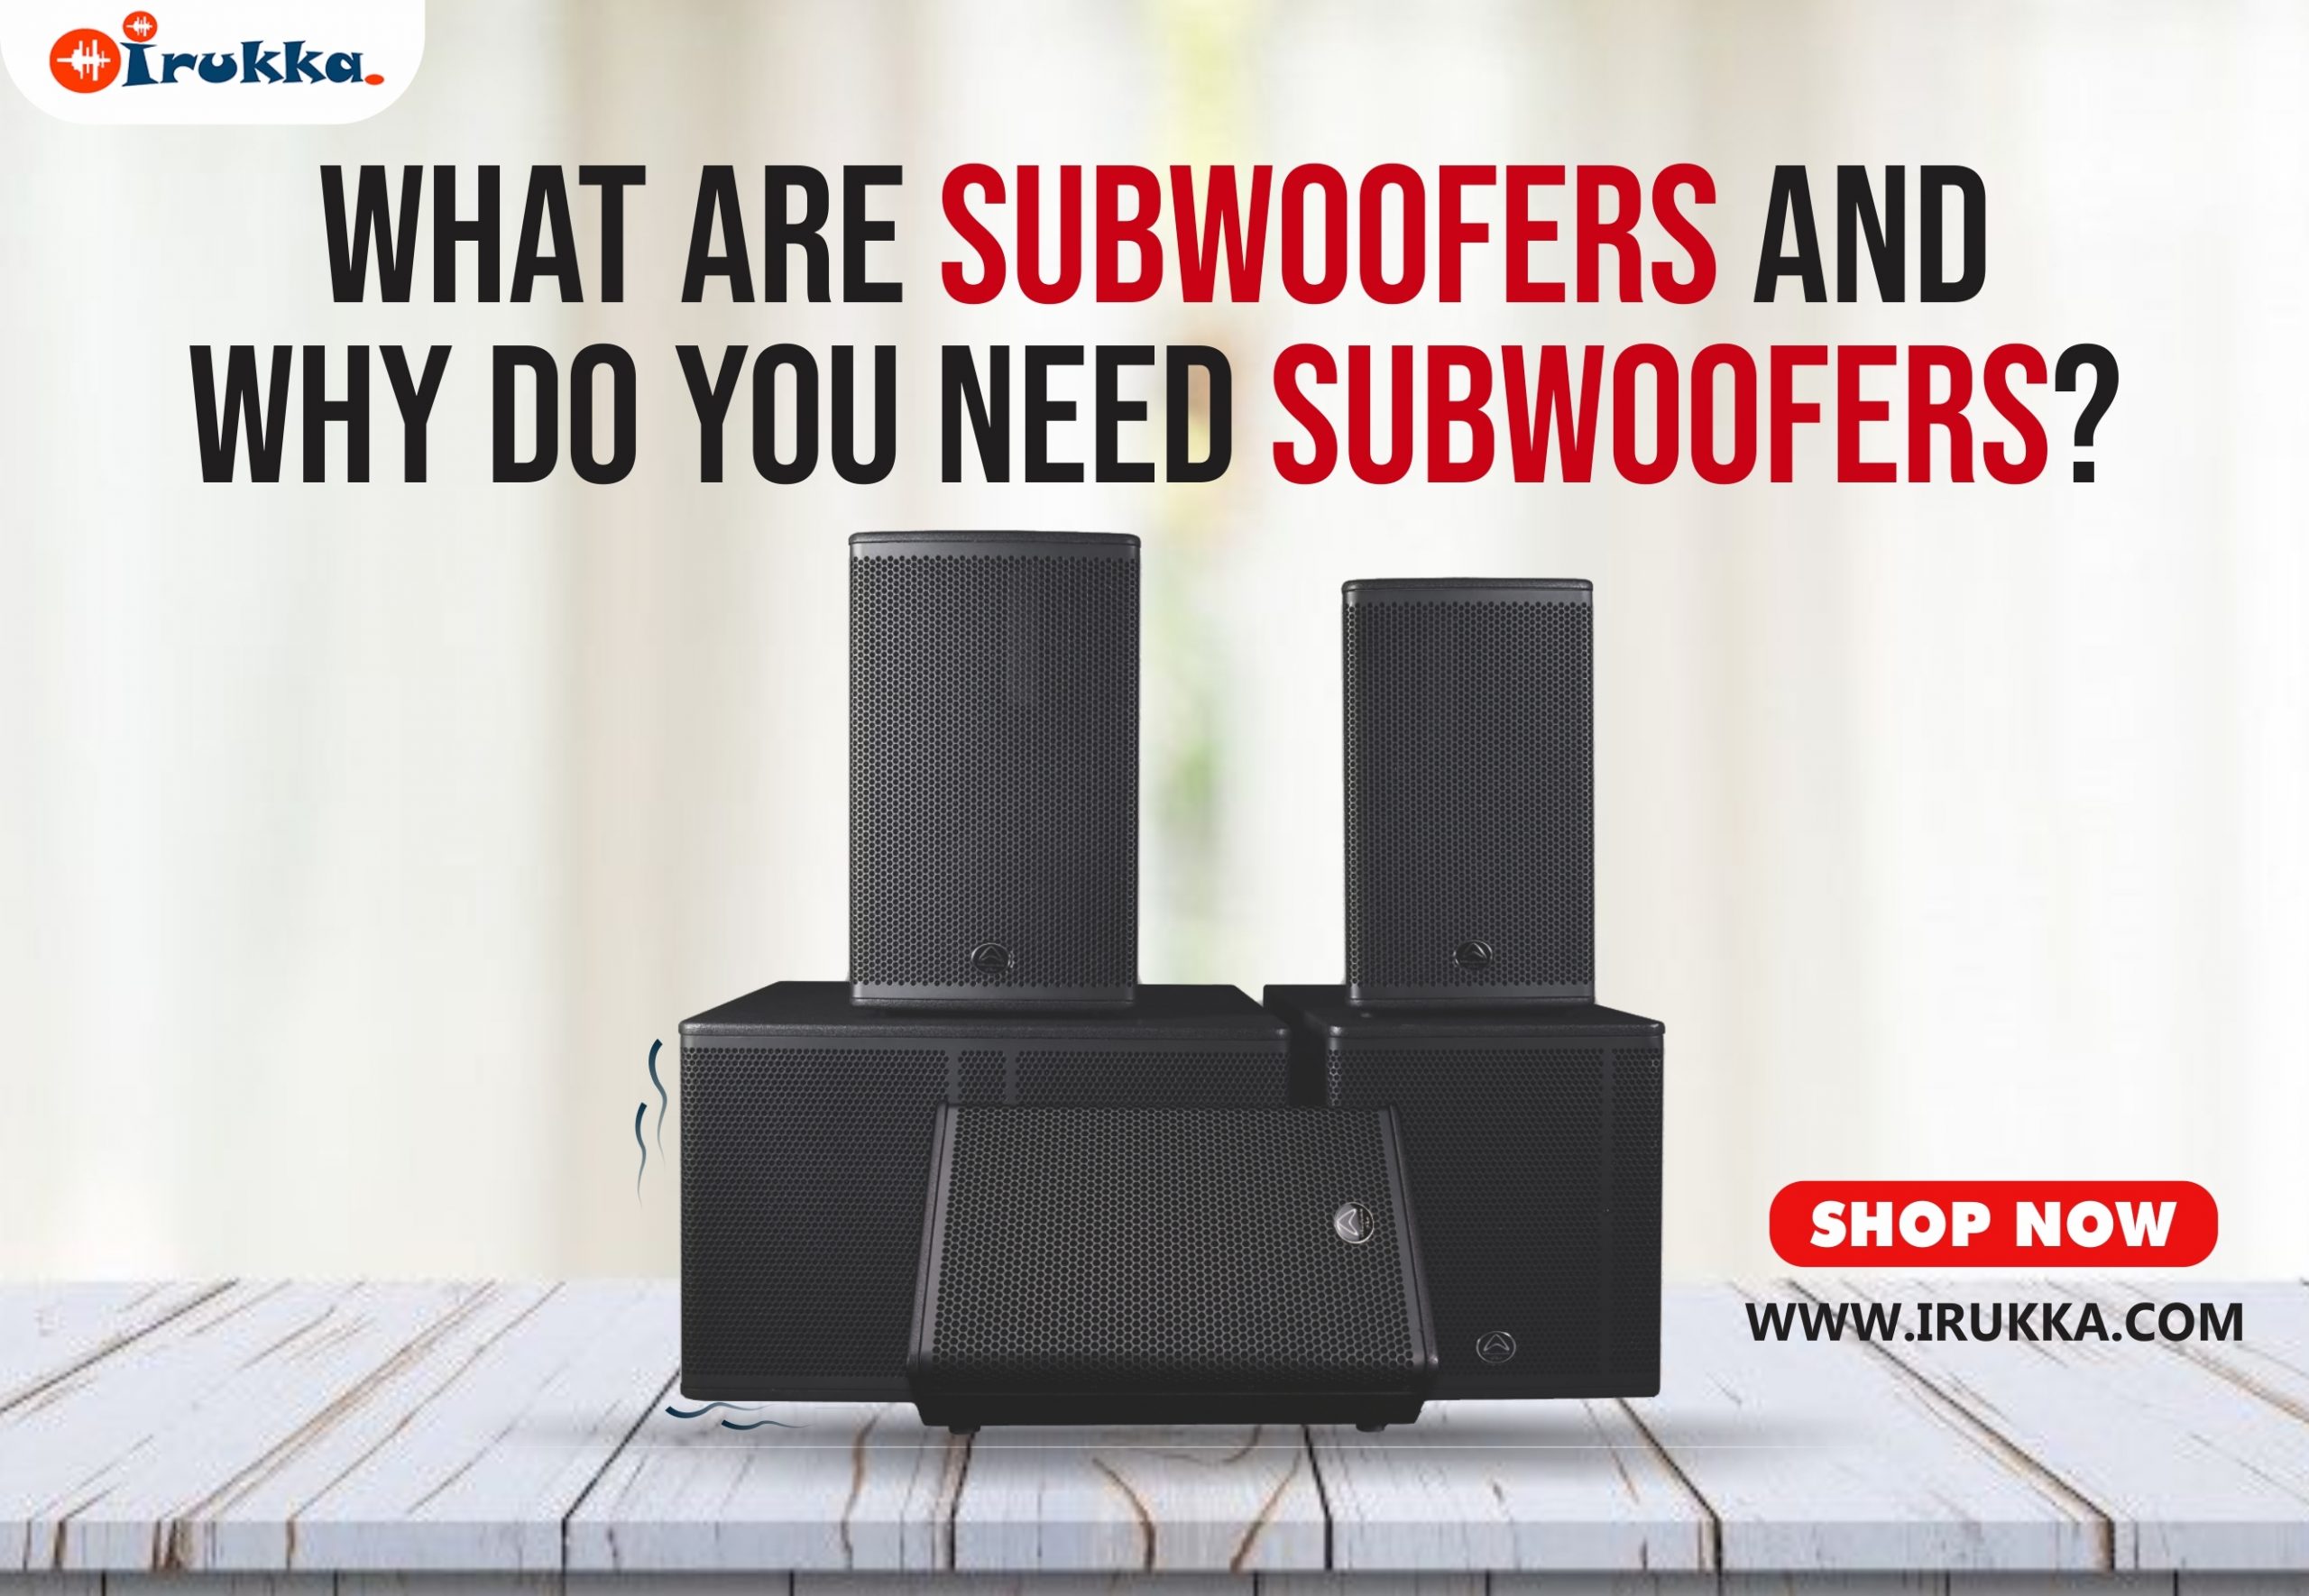 What are Subwoofers and Why Do You Need Subwoofers